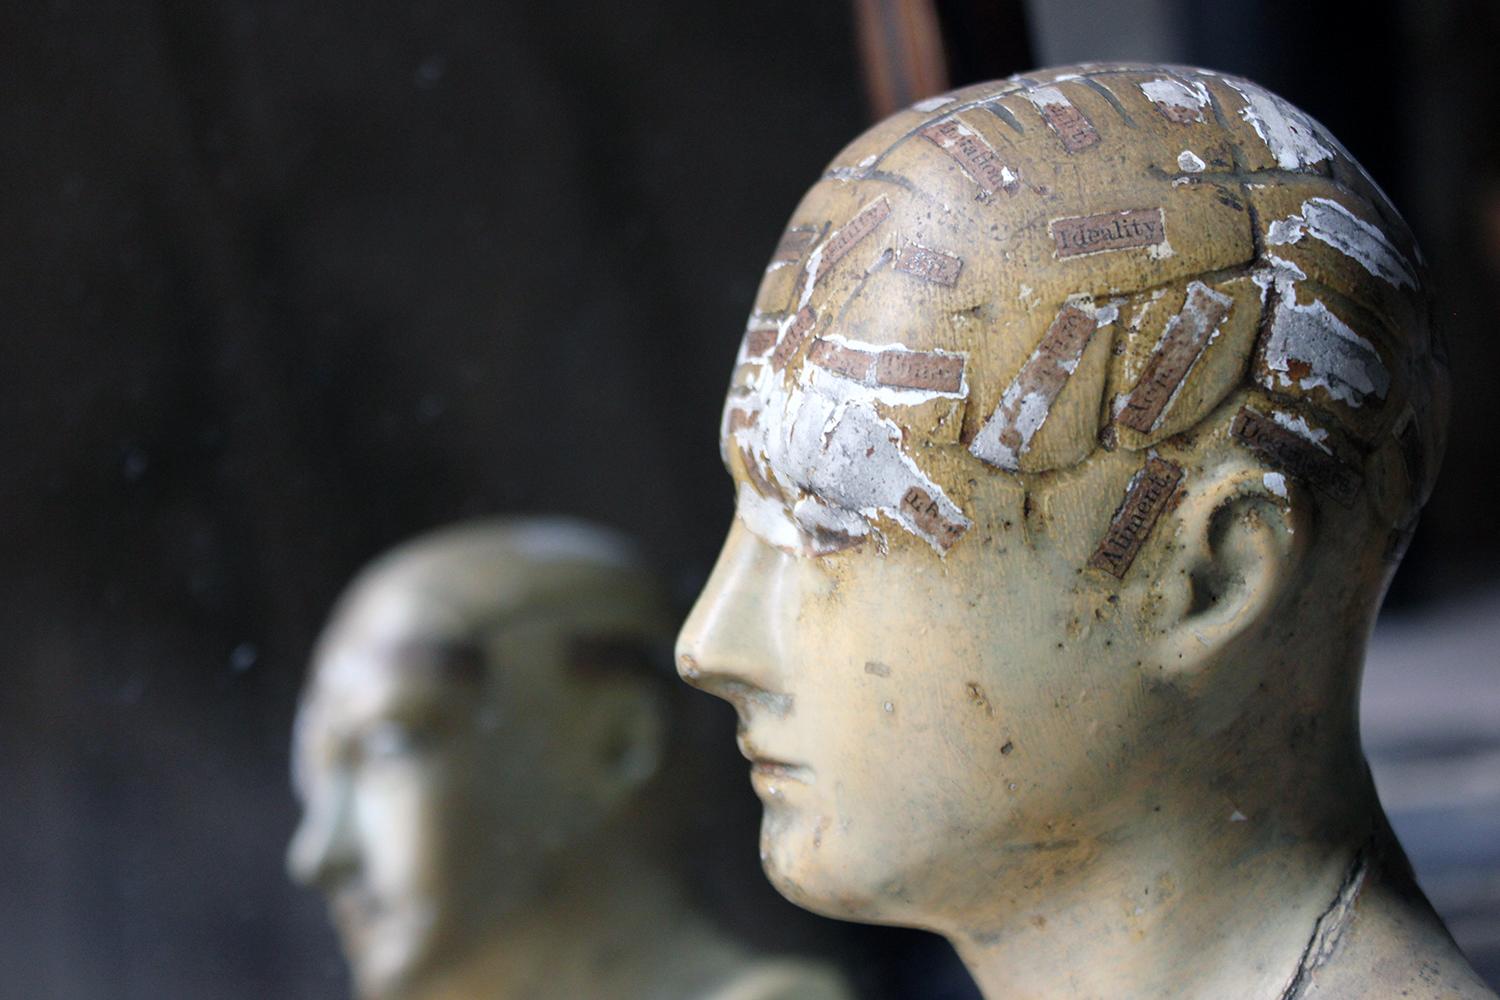 The wonderfully evocative phrenologist bust in plaster, mapping the labeled regions of the human brain, such as 'Intellectual Faculties' and 'Destructive' via a number of printed paper labels applied to the head listing the mental faculties, and